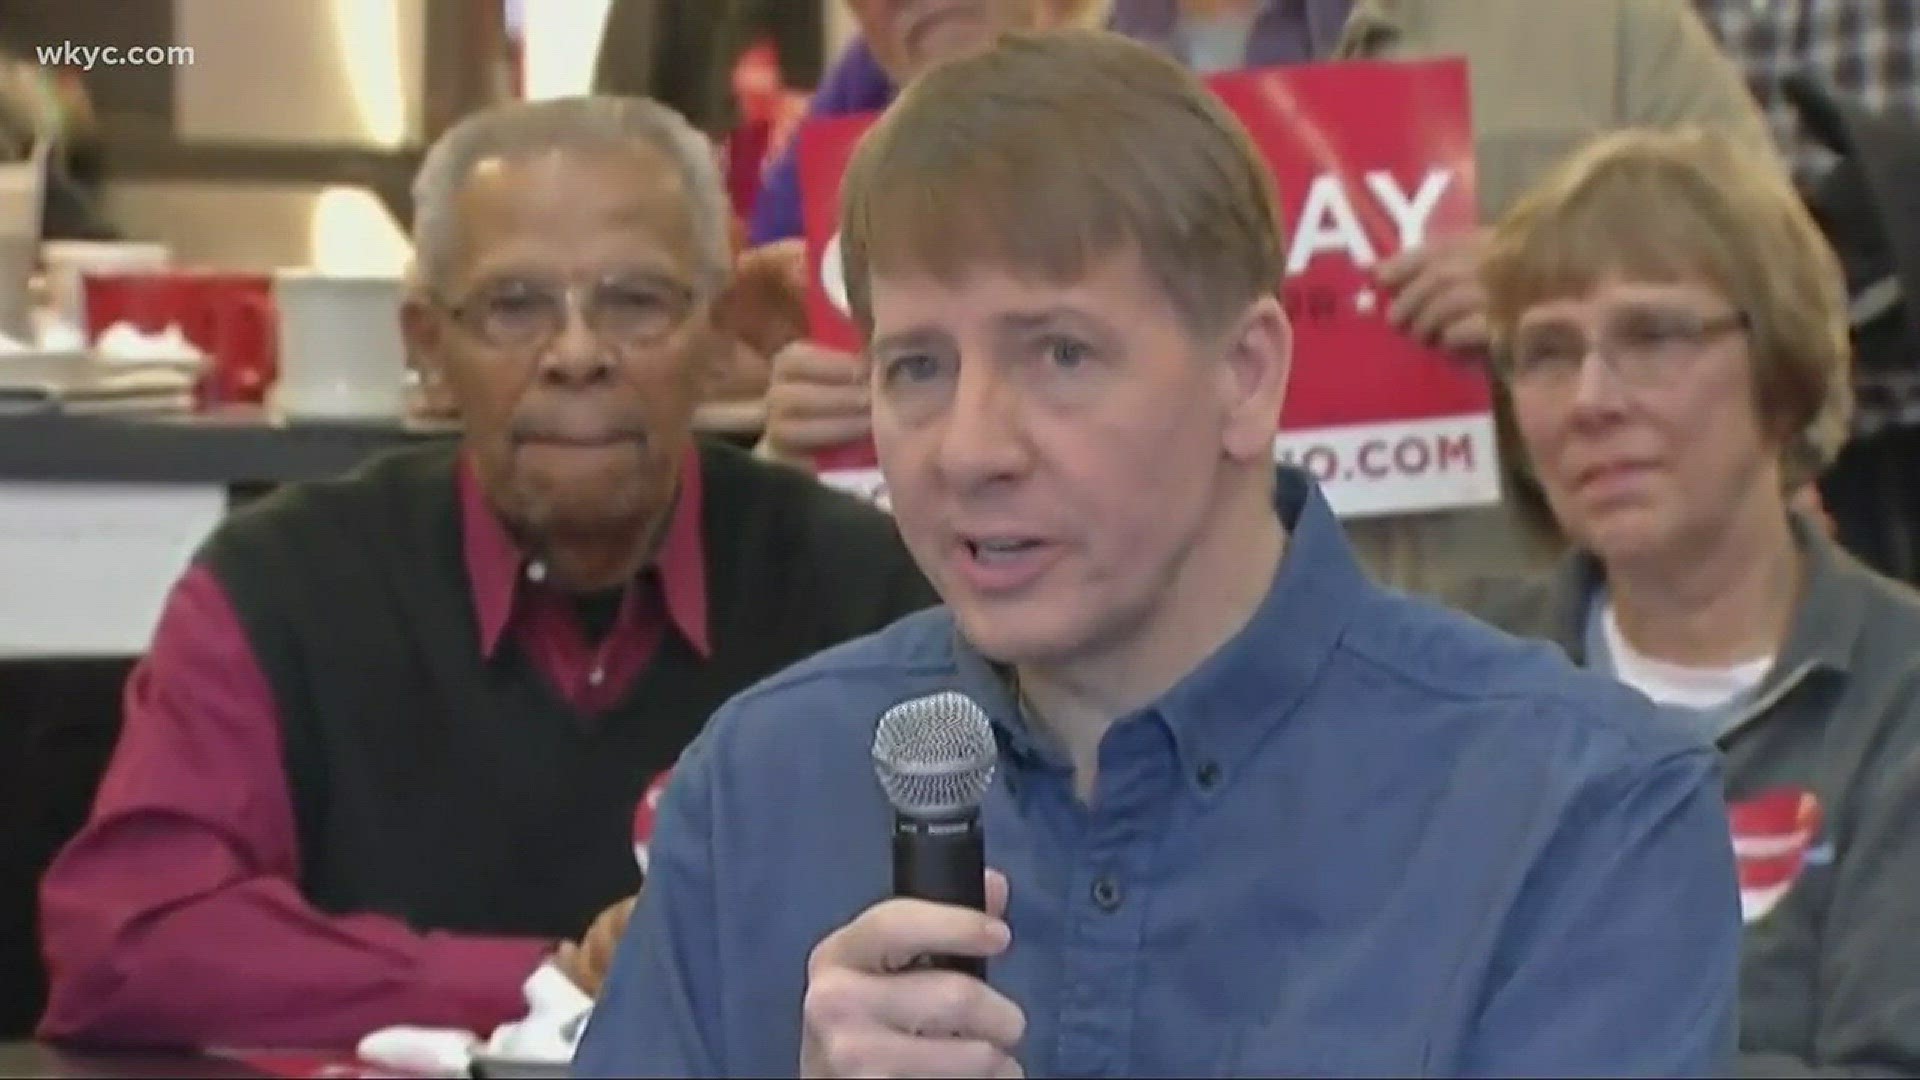 Dec. 5, 2017: Add Richard Cordray's name to the list of candidates running to be Ohio's next governor. The Democrat announced his campaign Tuesday saying he will focus on 'kitchen table issues' like the cost of health care.